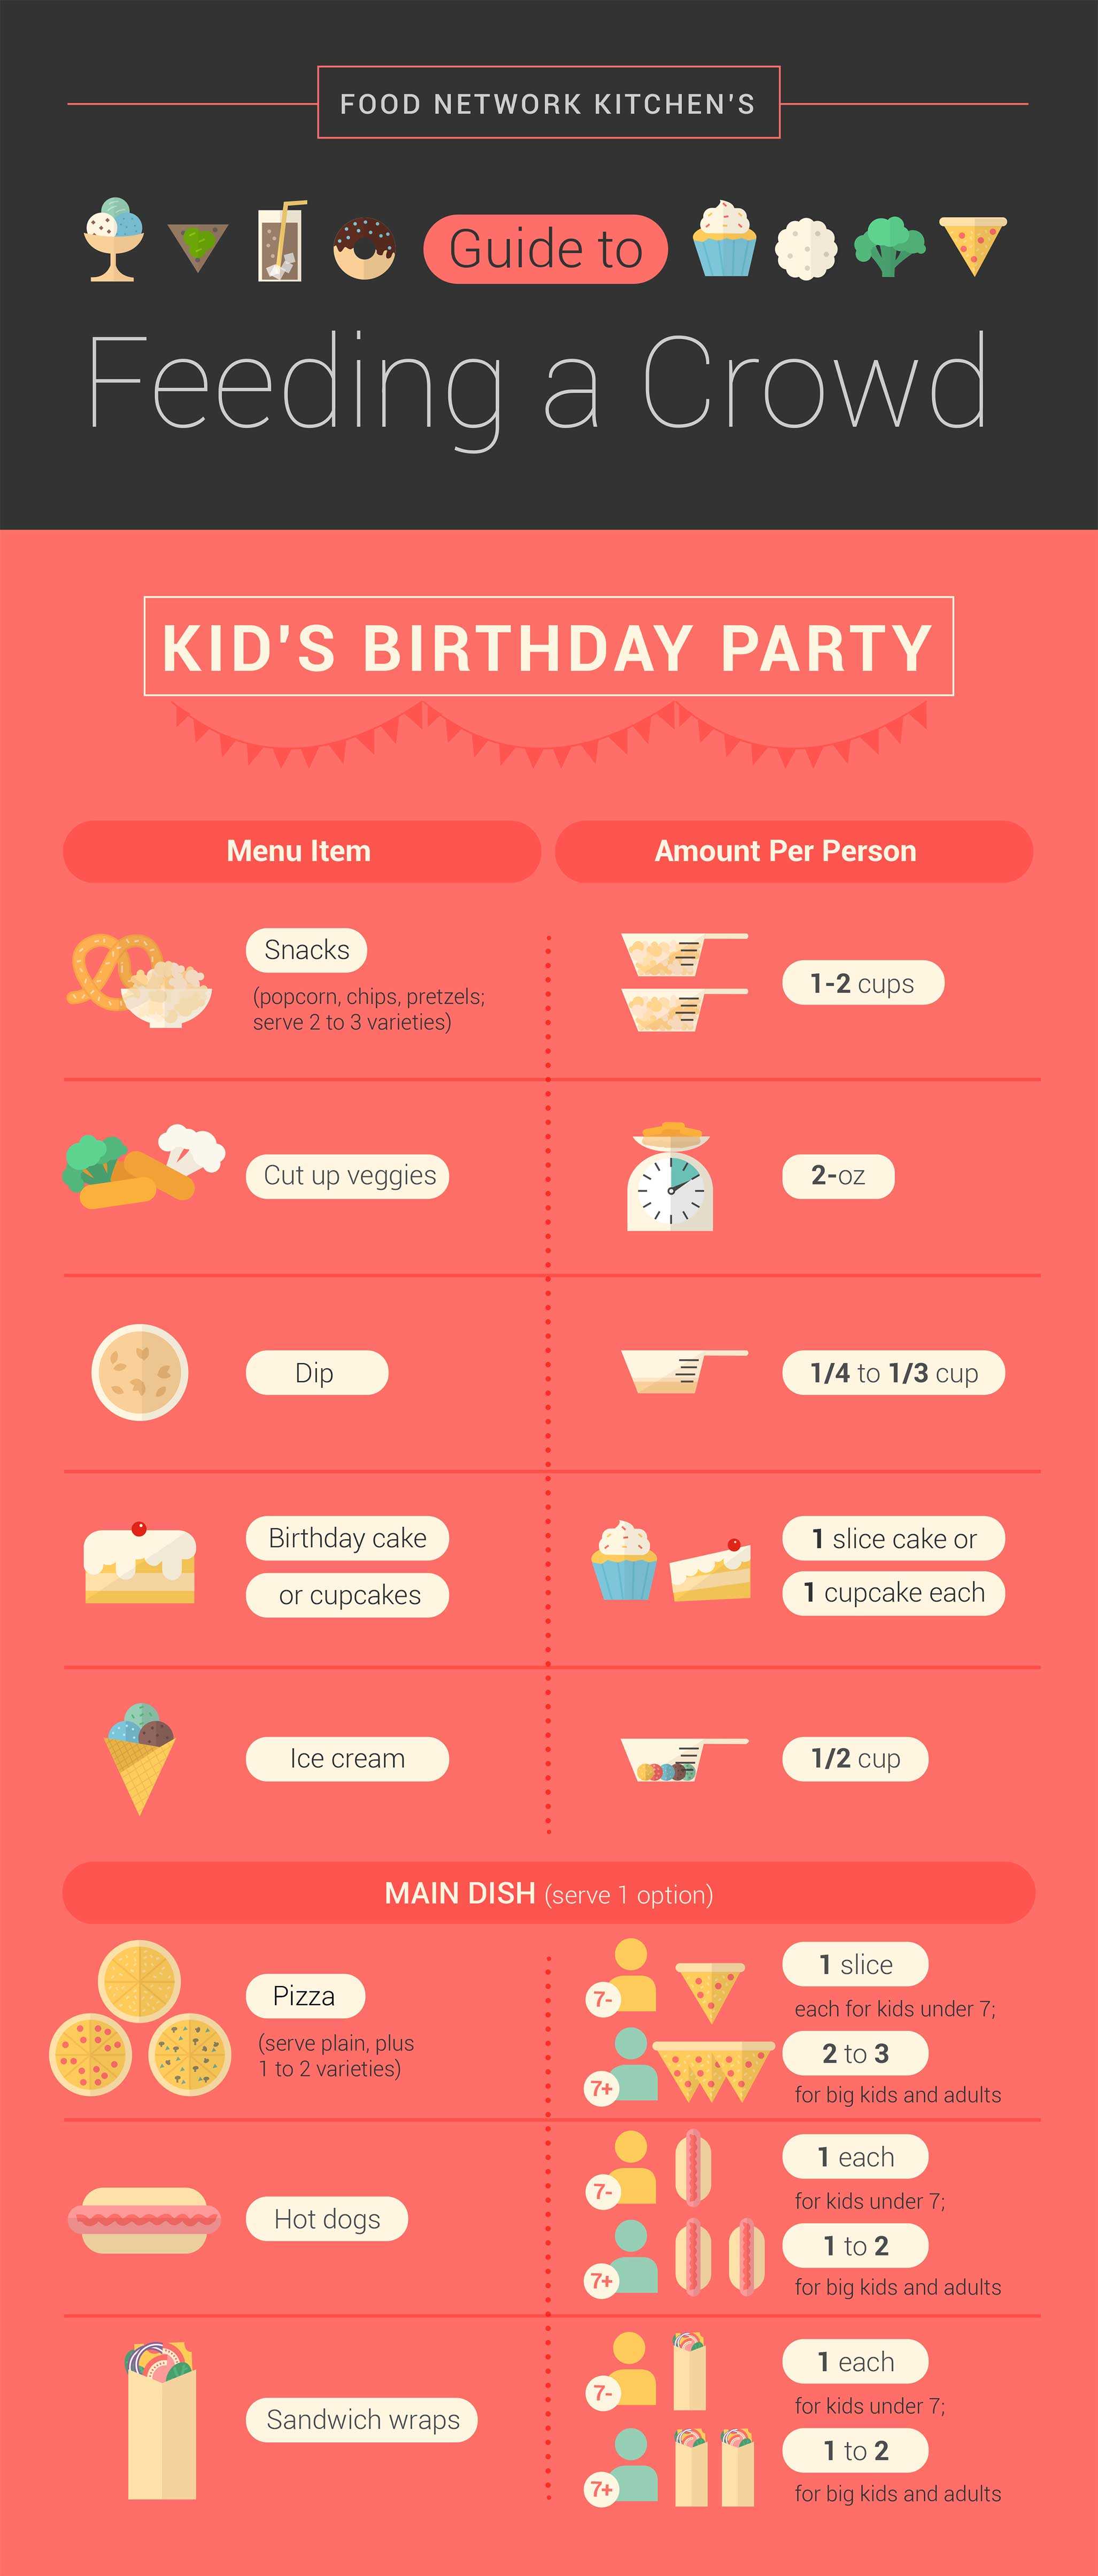 How Much Food To Serve At A Kid's Birthday Party